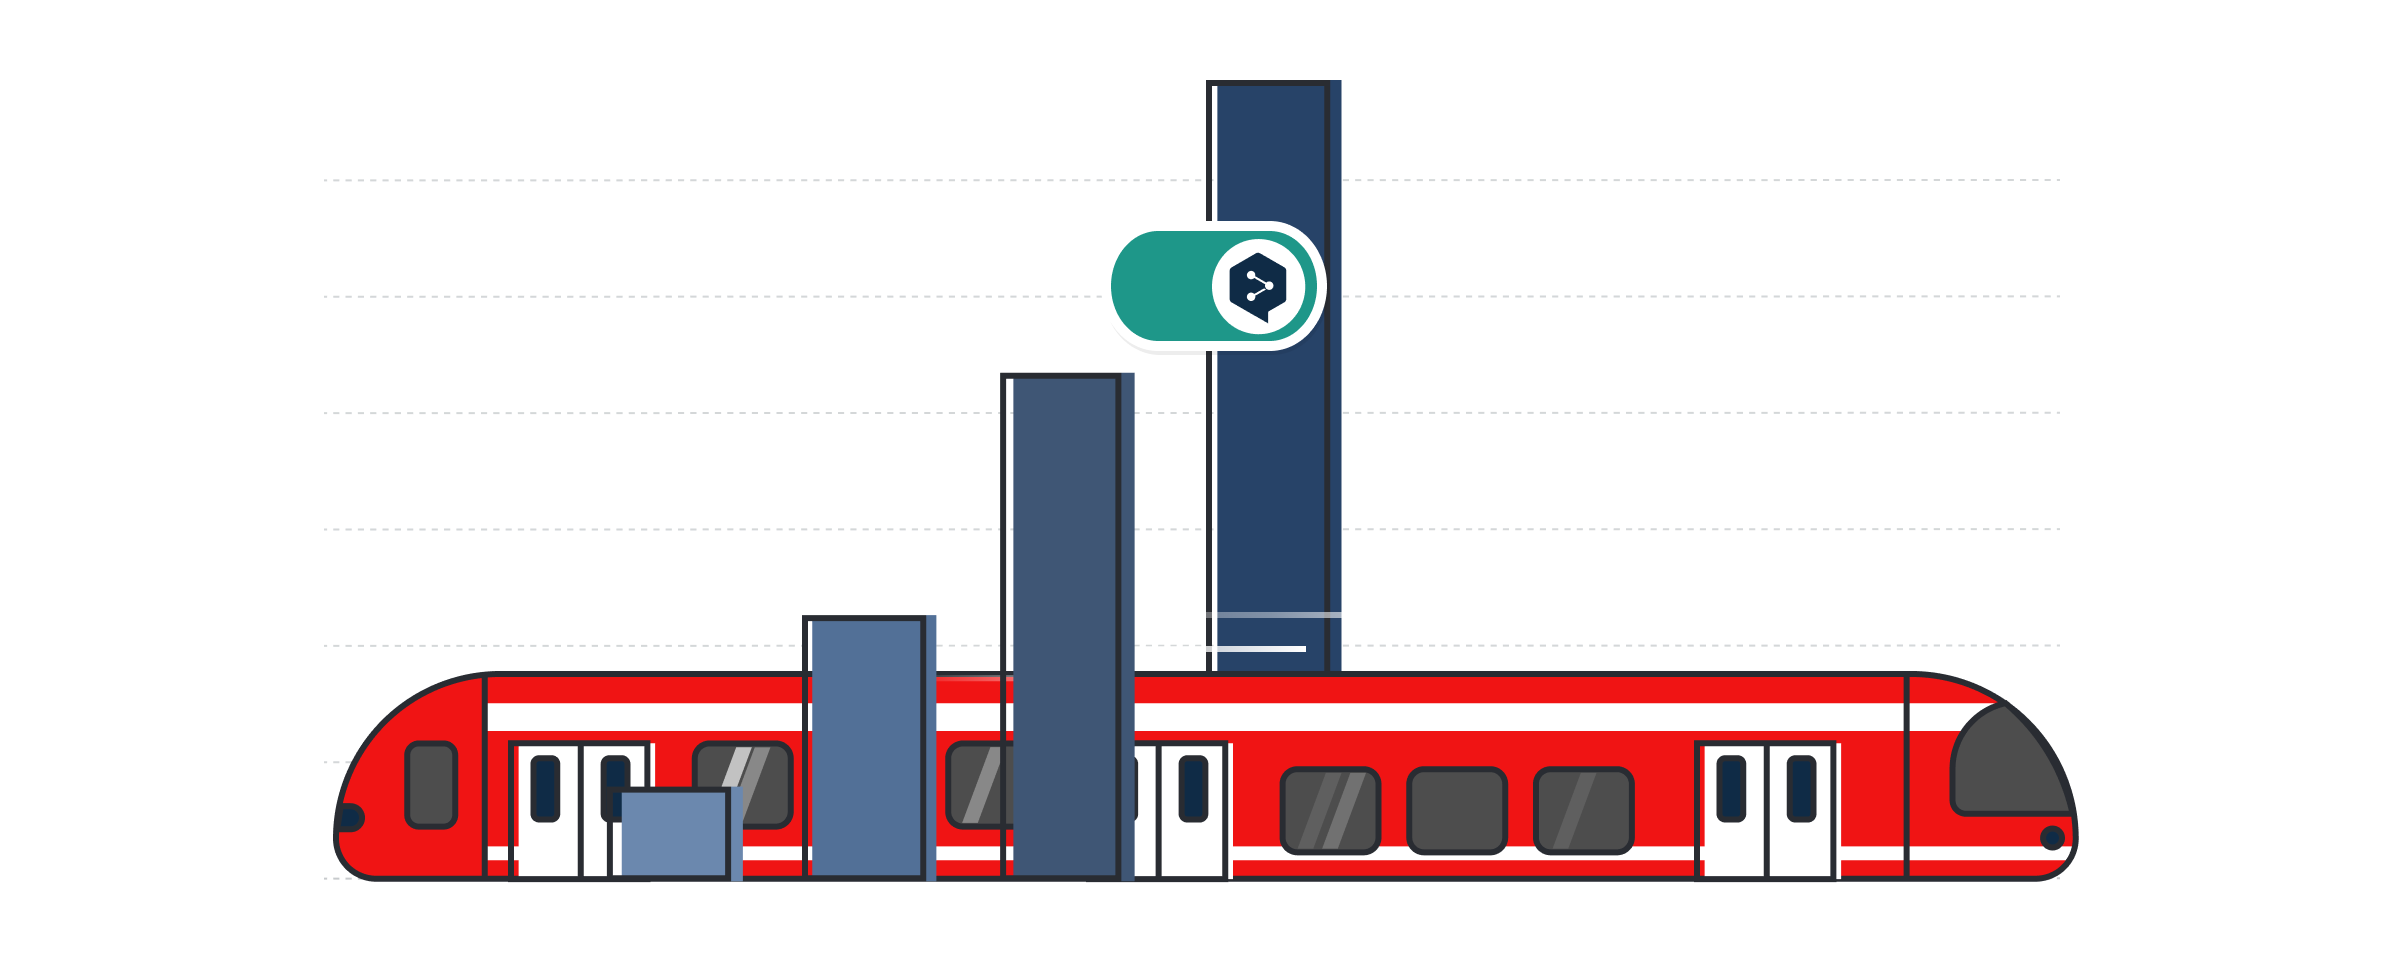 Illustration showing a red DB train and the DeepL Pro logo over a bar graph